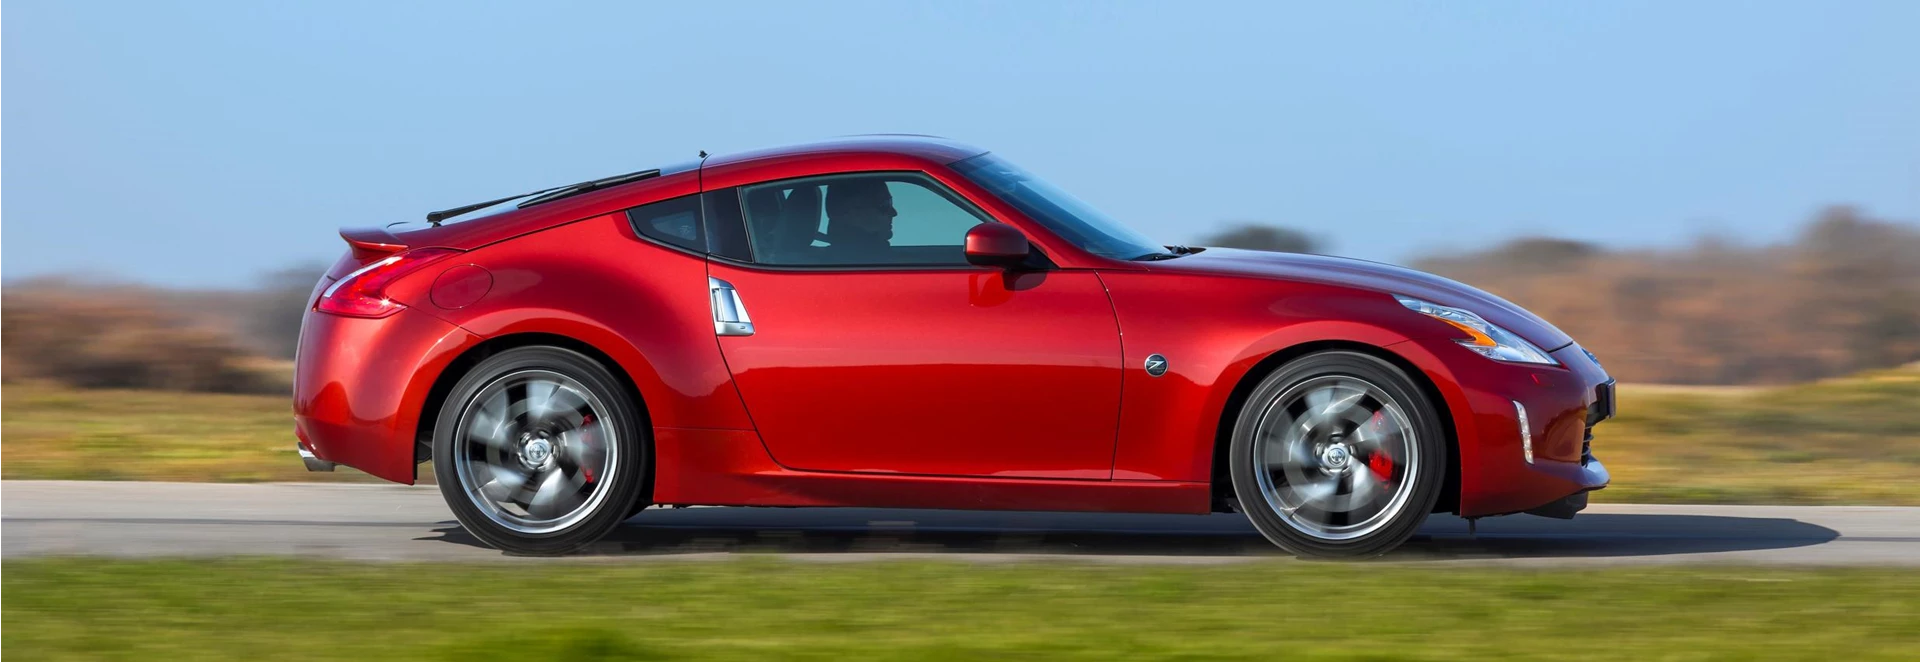 2018 Nissan 370Z review